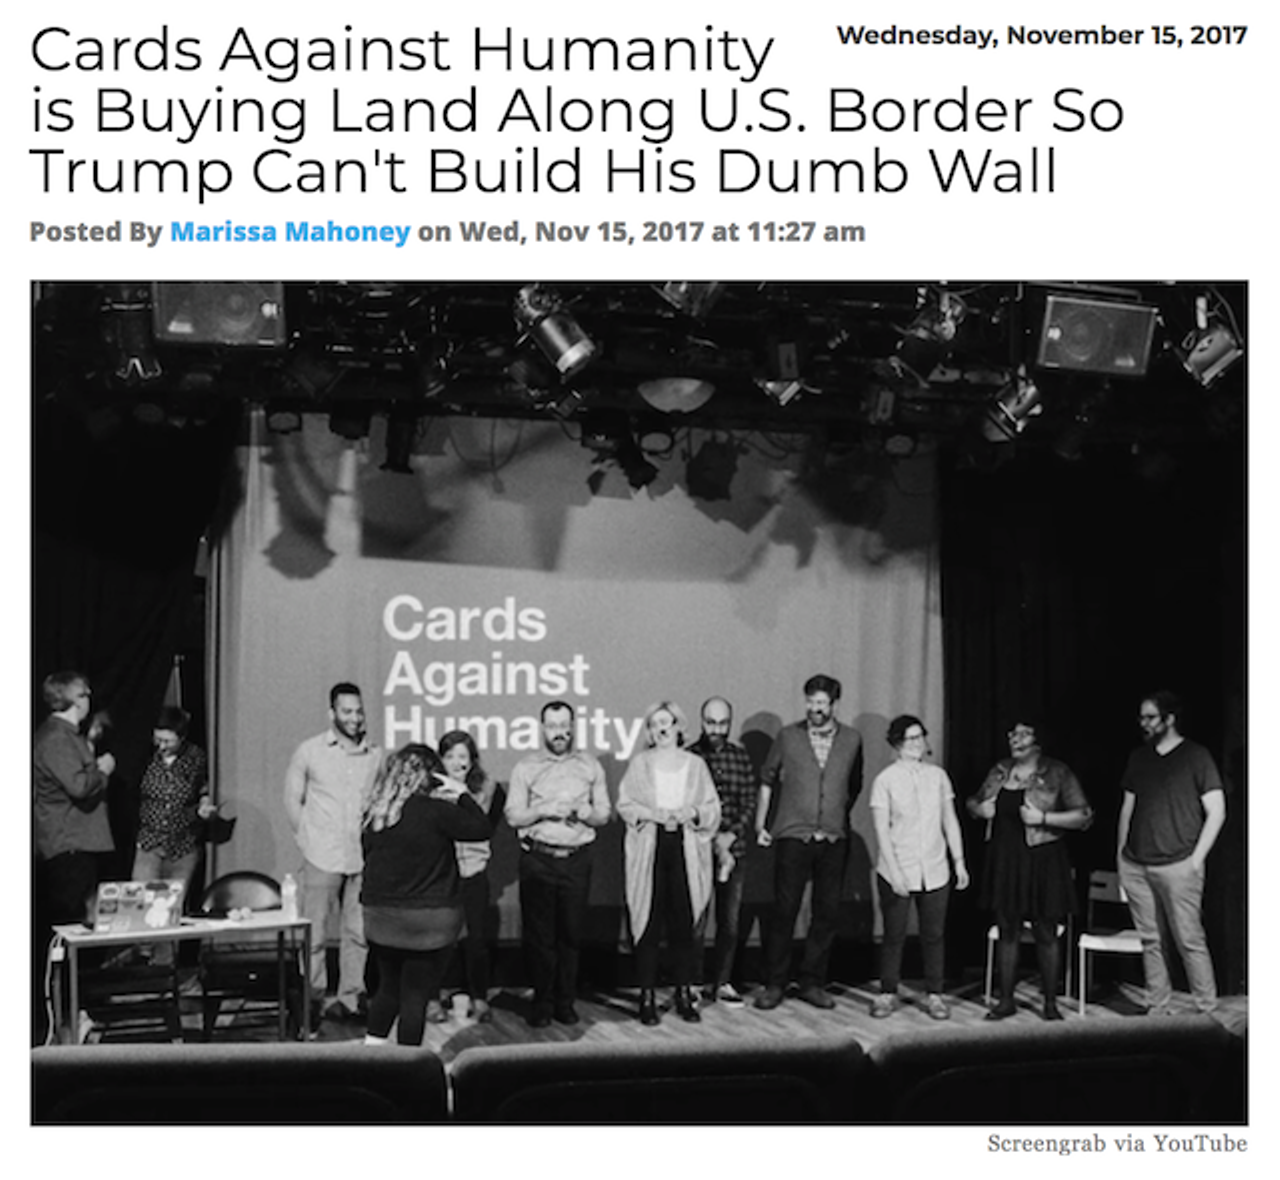 Cards Against Humanity drummed up cash with an “America-saving” promotion to buy a piece of land along the Texas-Mexico border. We like to think that no wall is a good wall. Read more.